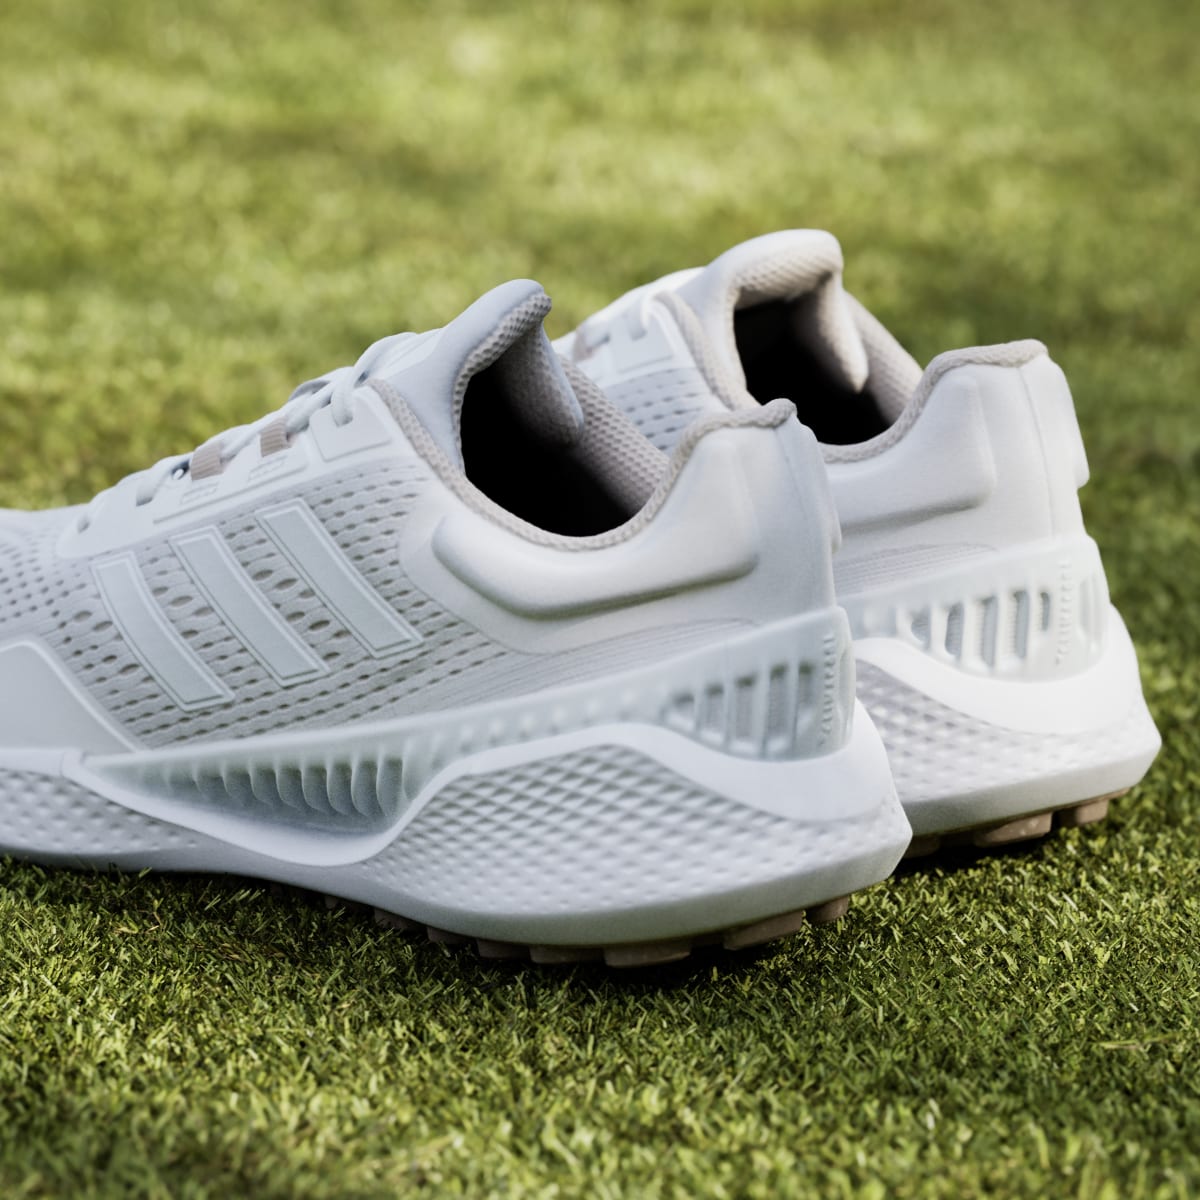 Adidas Summervent 24 Bounce Golf Shoes Low. 9